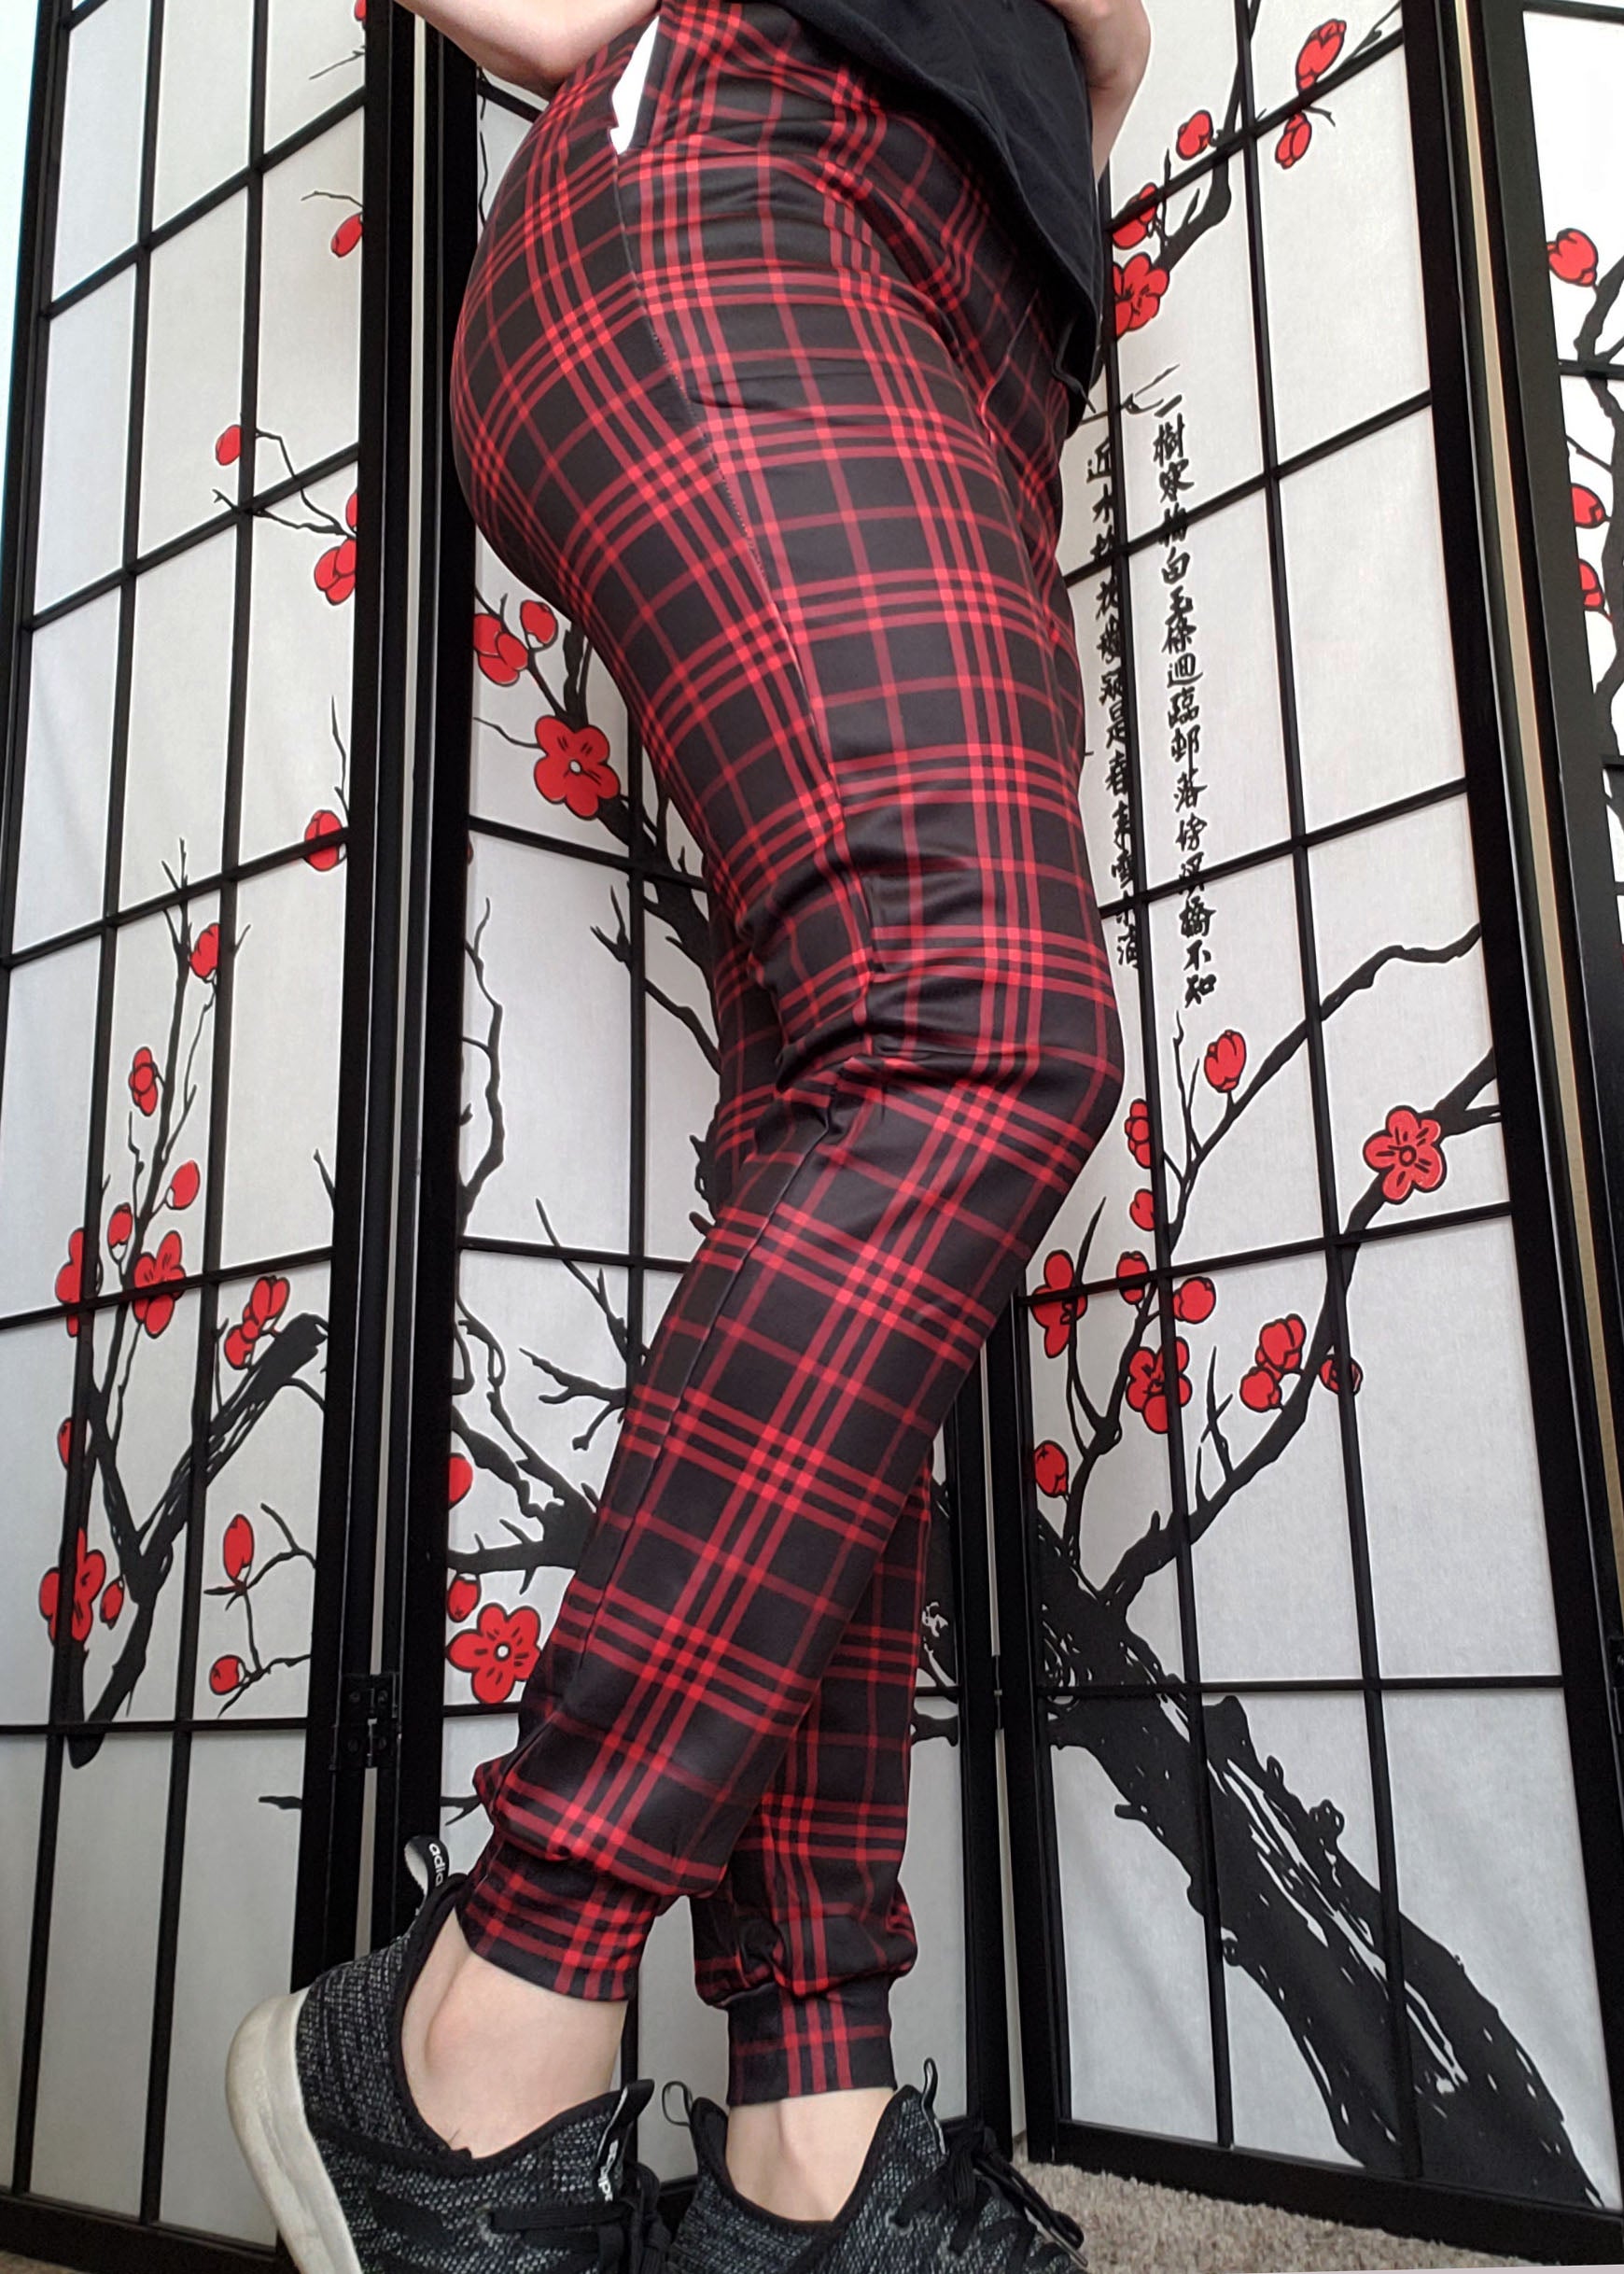 Red Plaid High Waisted Paper Bag Tie Front Pants | World of Leggings